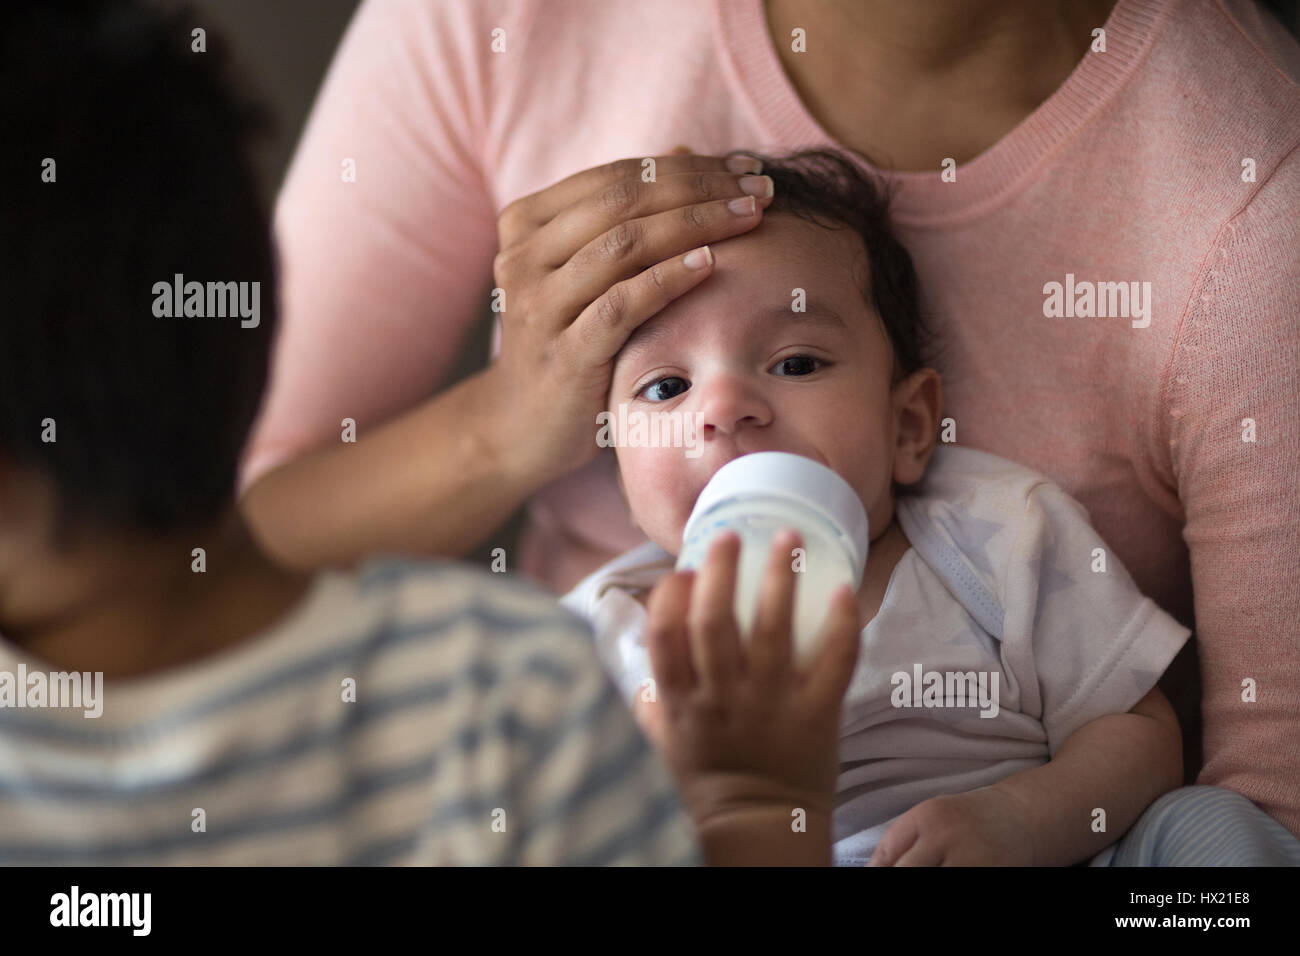 https://c8.alamy.com/comp/HX21E8/close-up-shot-of-a-baby-boy-being-fed-a-bottle-of-milk-by-his-older-HX21E8.jpg